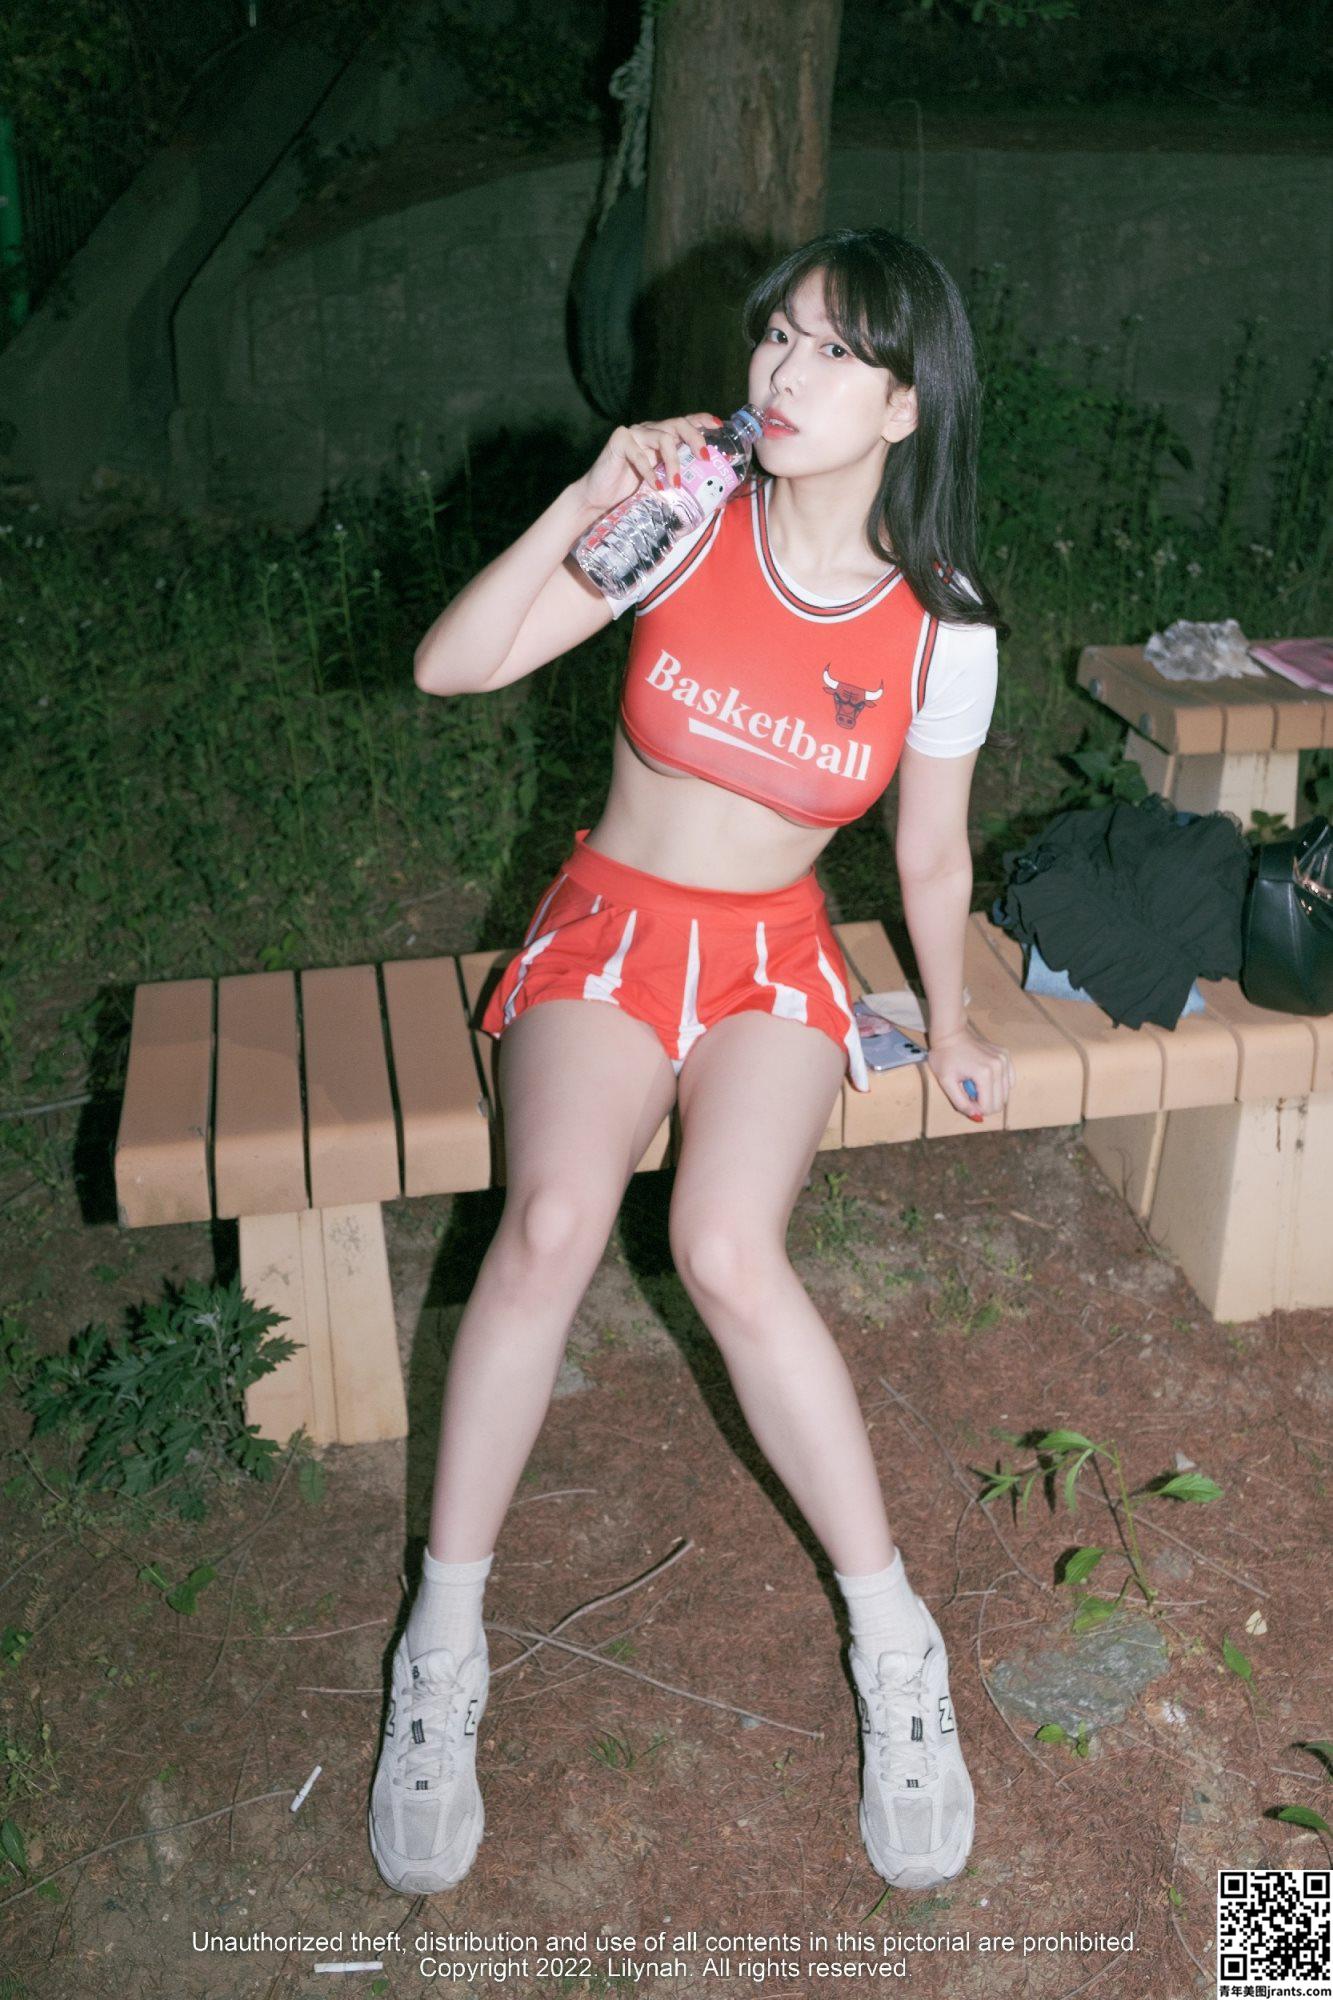 [Lilynah] Shaany VOL. 07 &#8211; Cheering Only